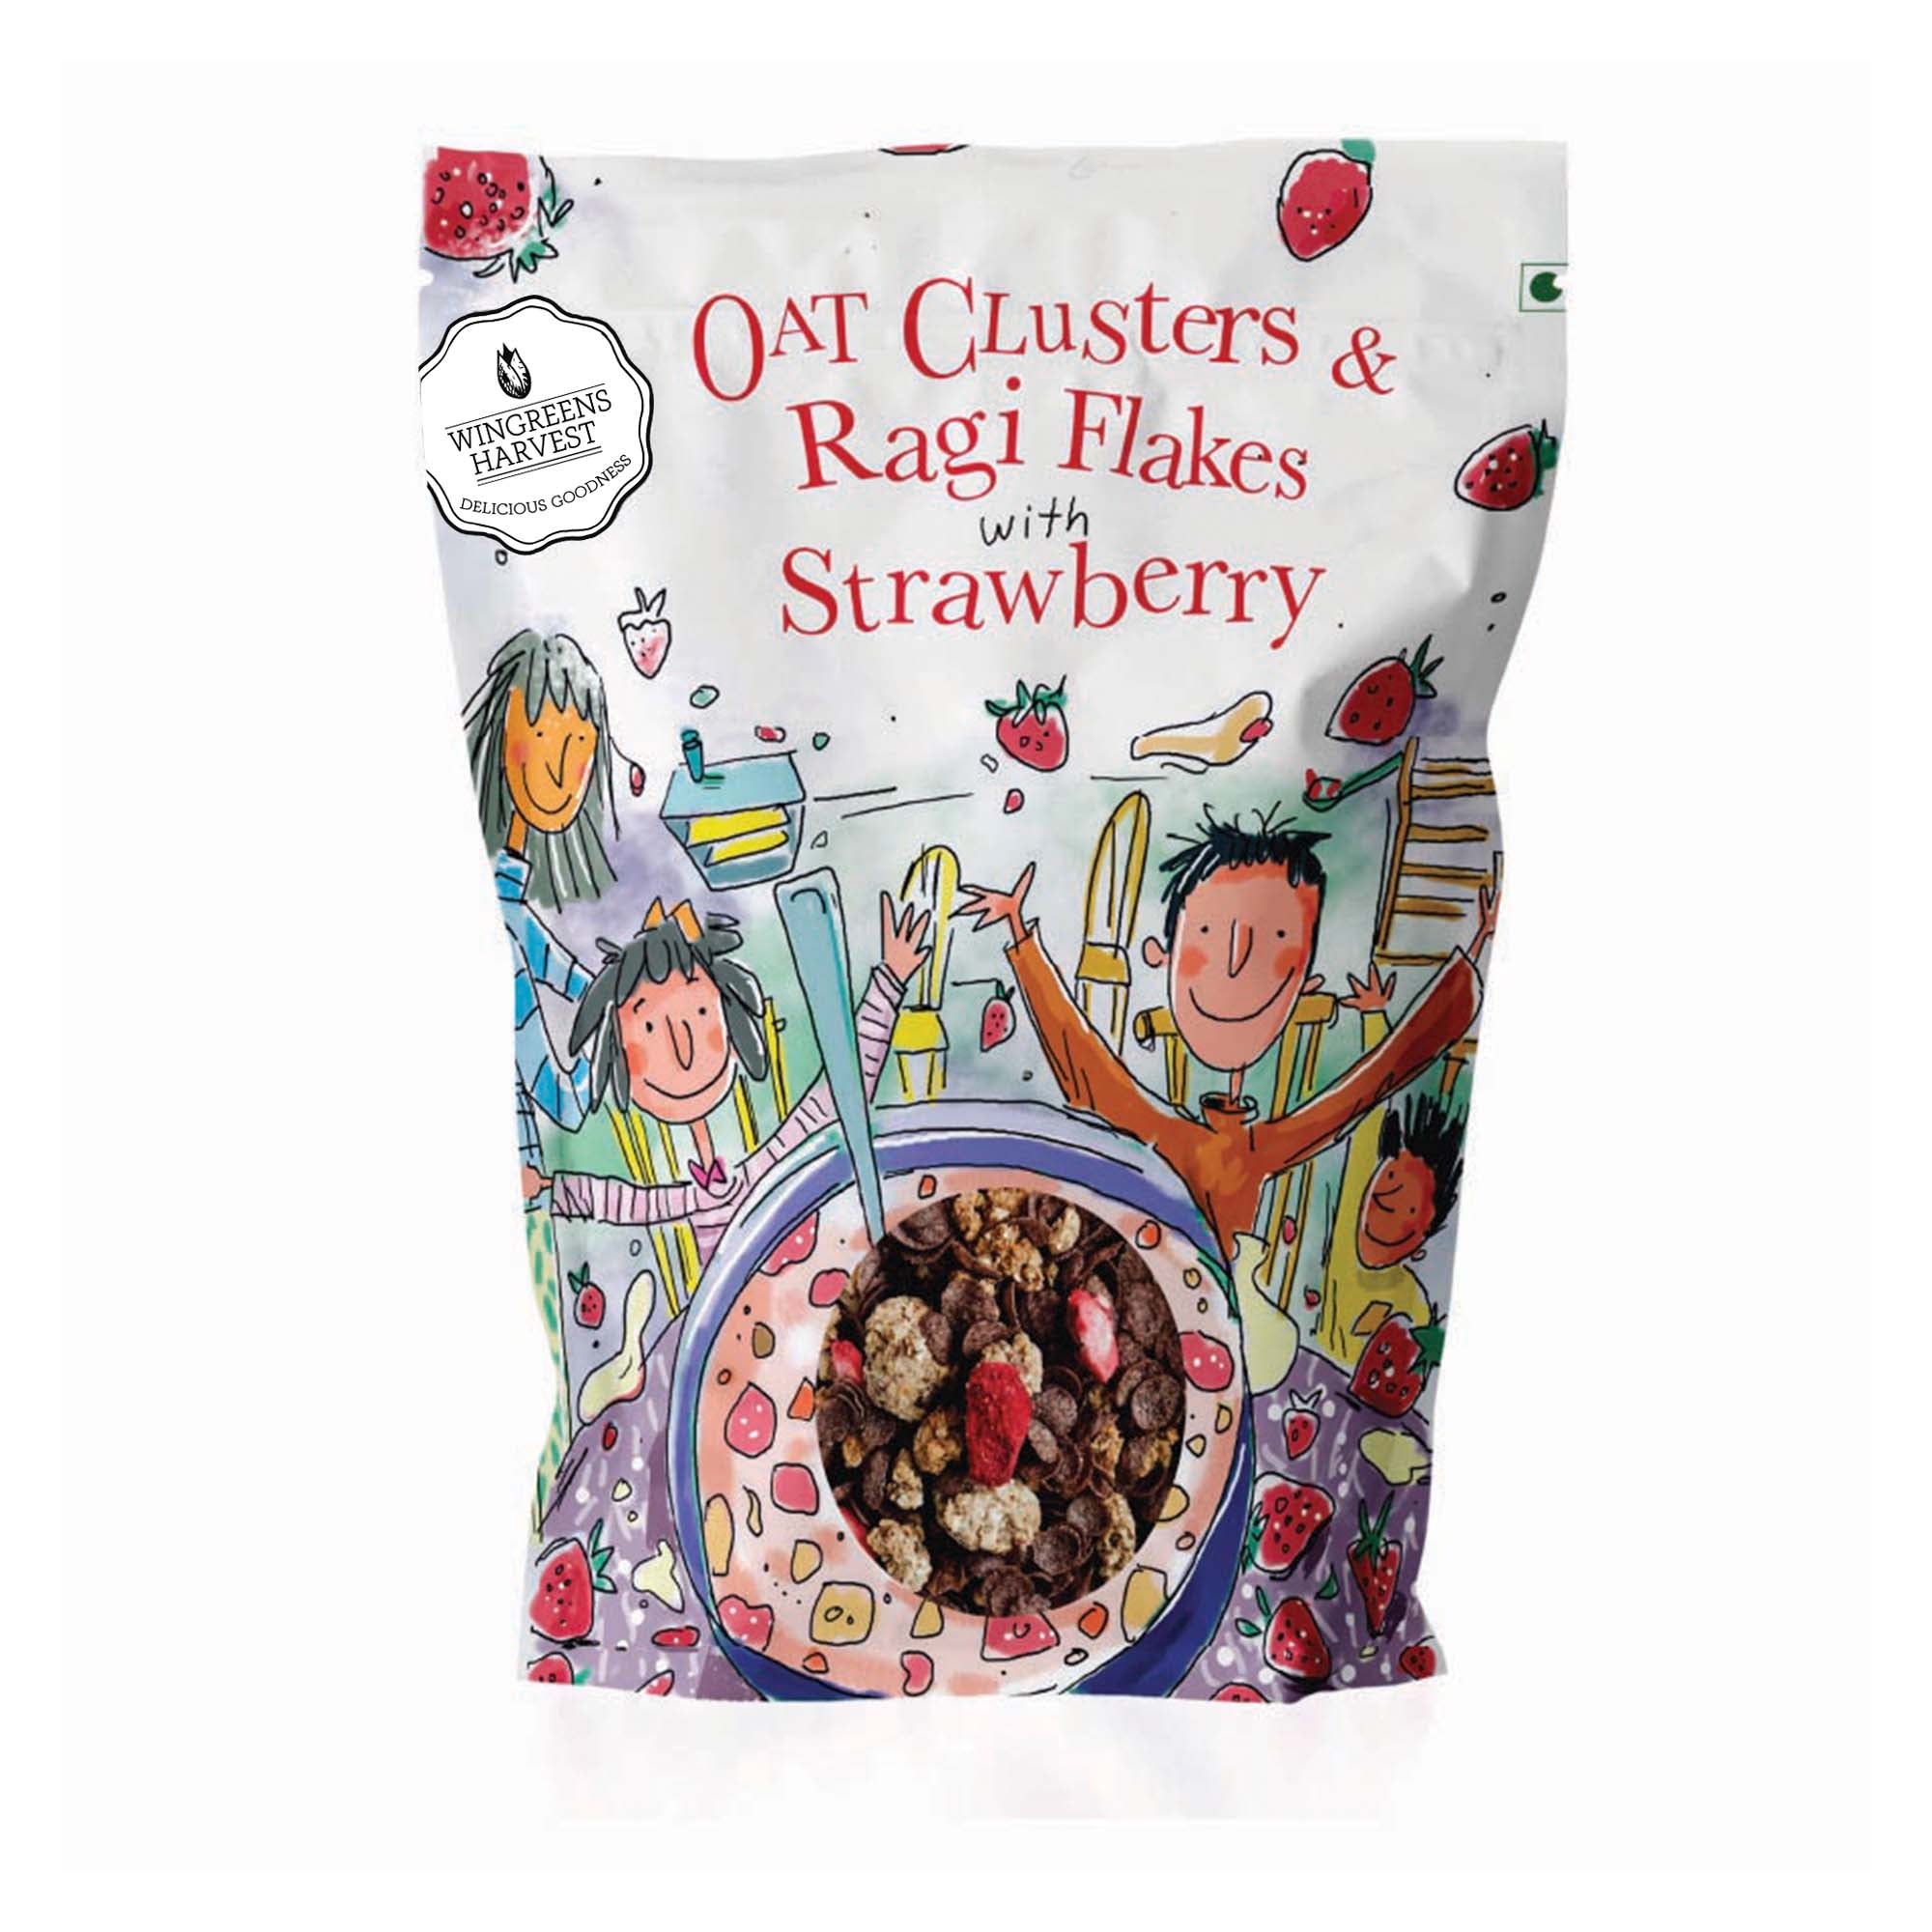 Breakfast Cereal - Oat Clusters & Ragi Flakes with Strawberry - 1KG